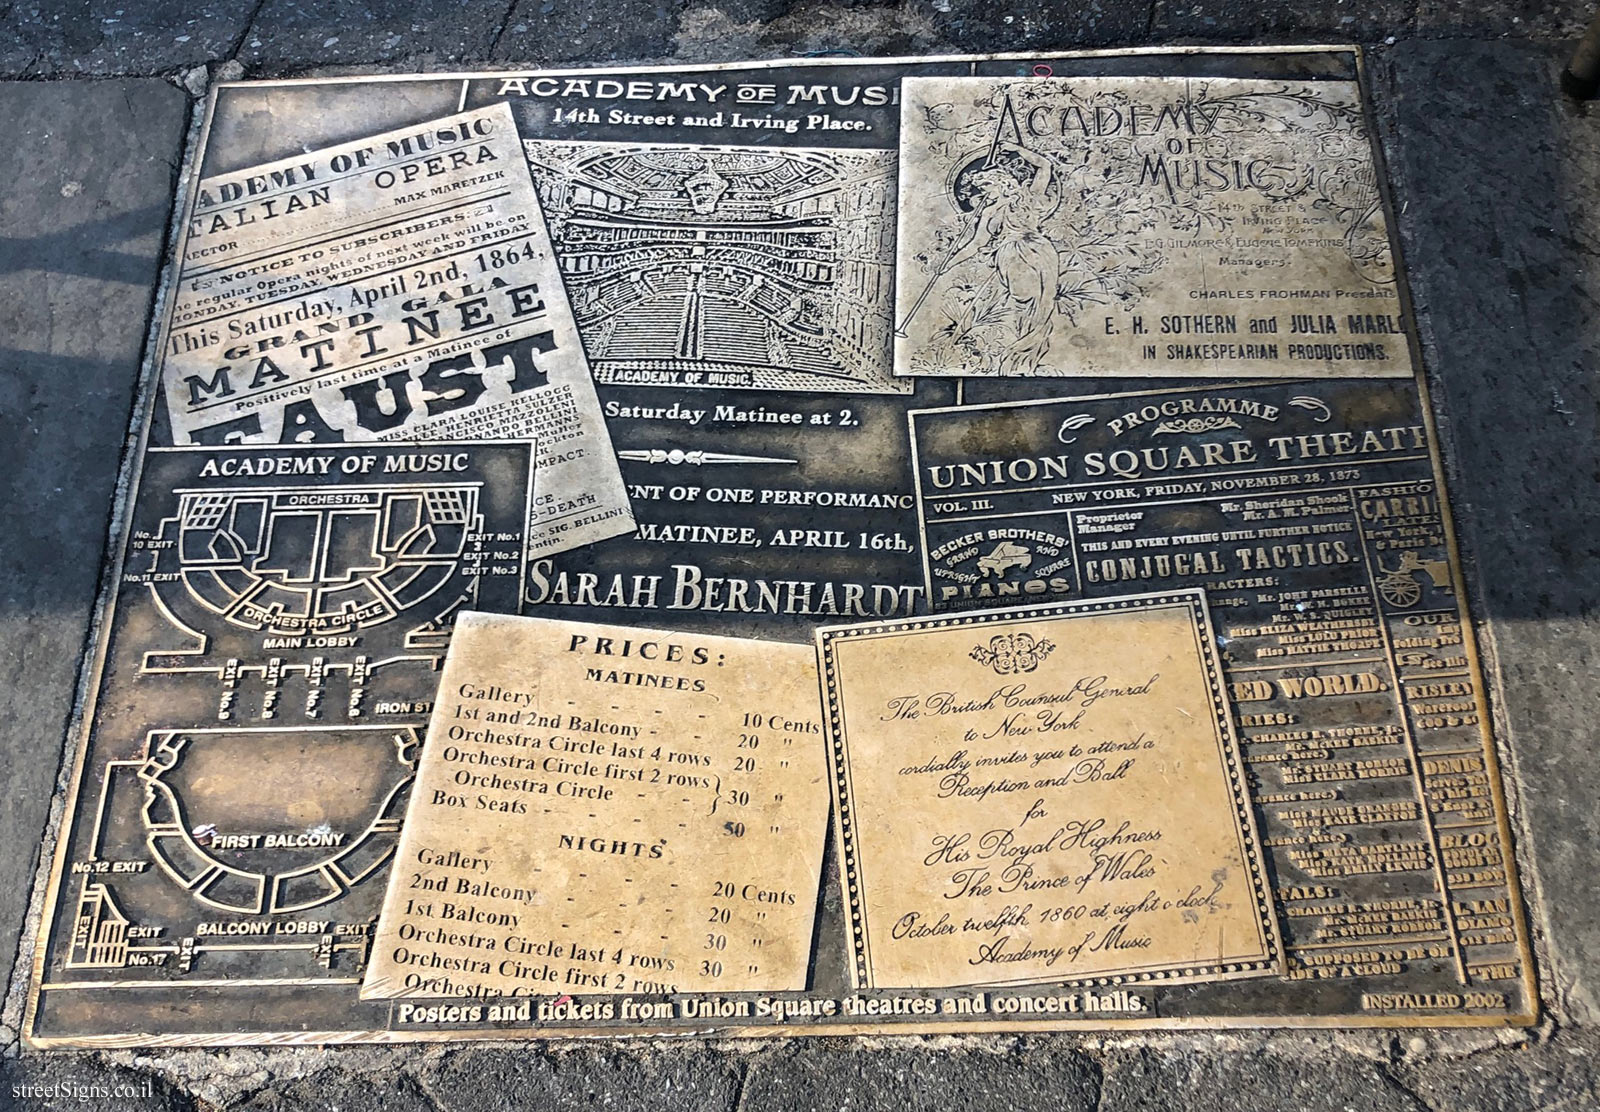 New York - Union Square Route - Posters and tickets for the Square shows in the 19th century